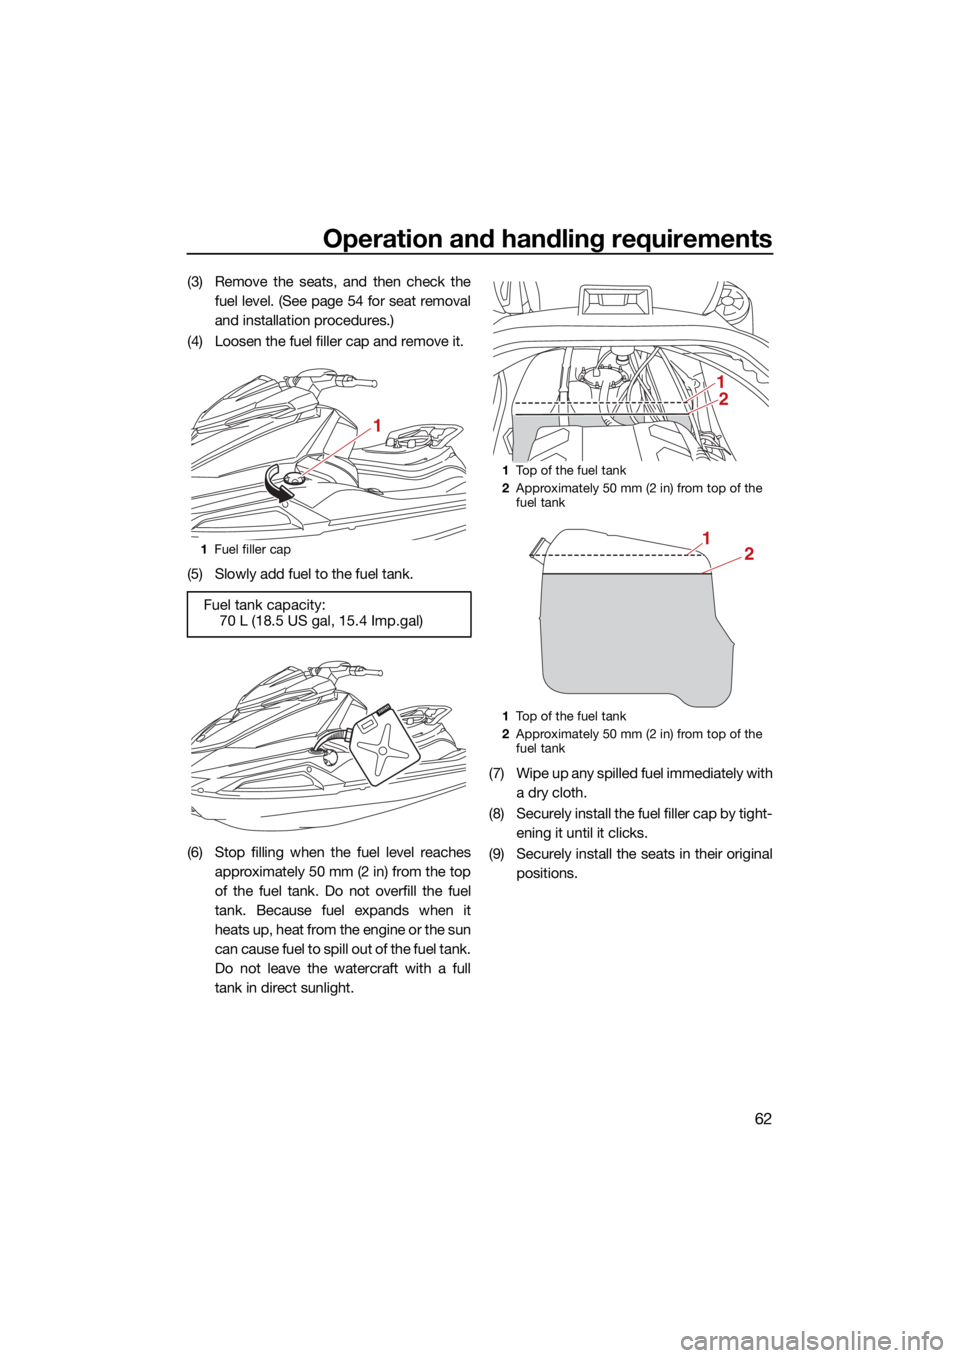 YAMAHA VX CRUISER 2022  Owners Manual Operation and handling requirements
62
(3) Remove the seats, and then check thefuel level. (See page 54 for seat removal
and installation procedures.)
(4) Loosen the fuel filler cap and remove it.
(5)